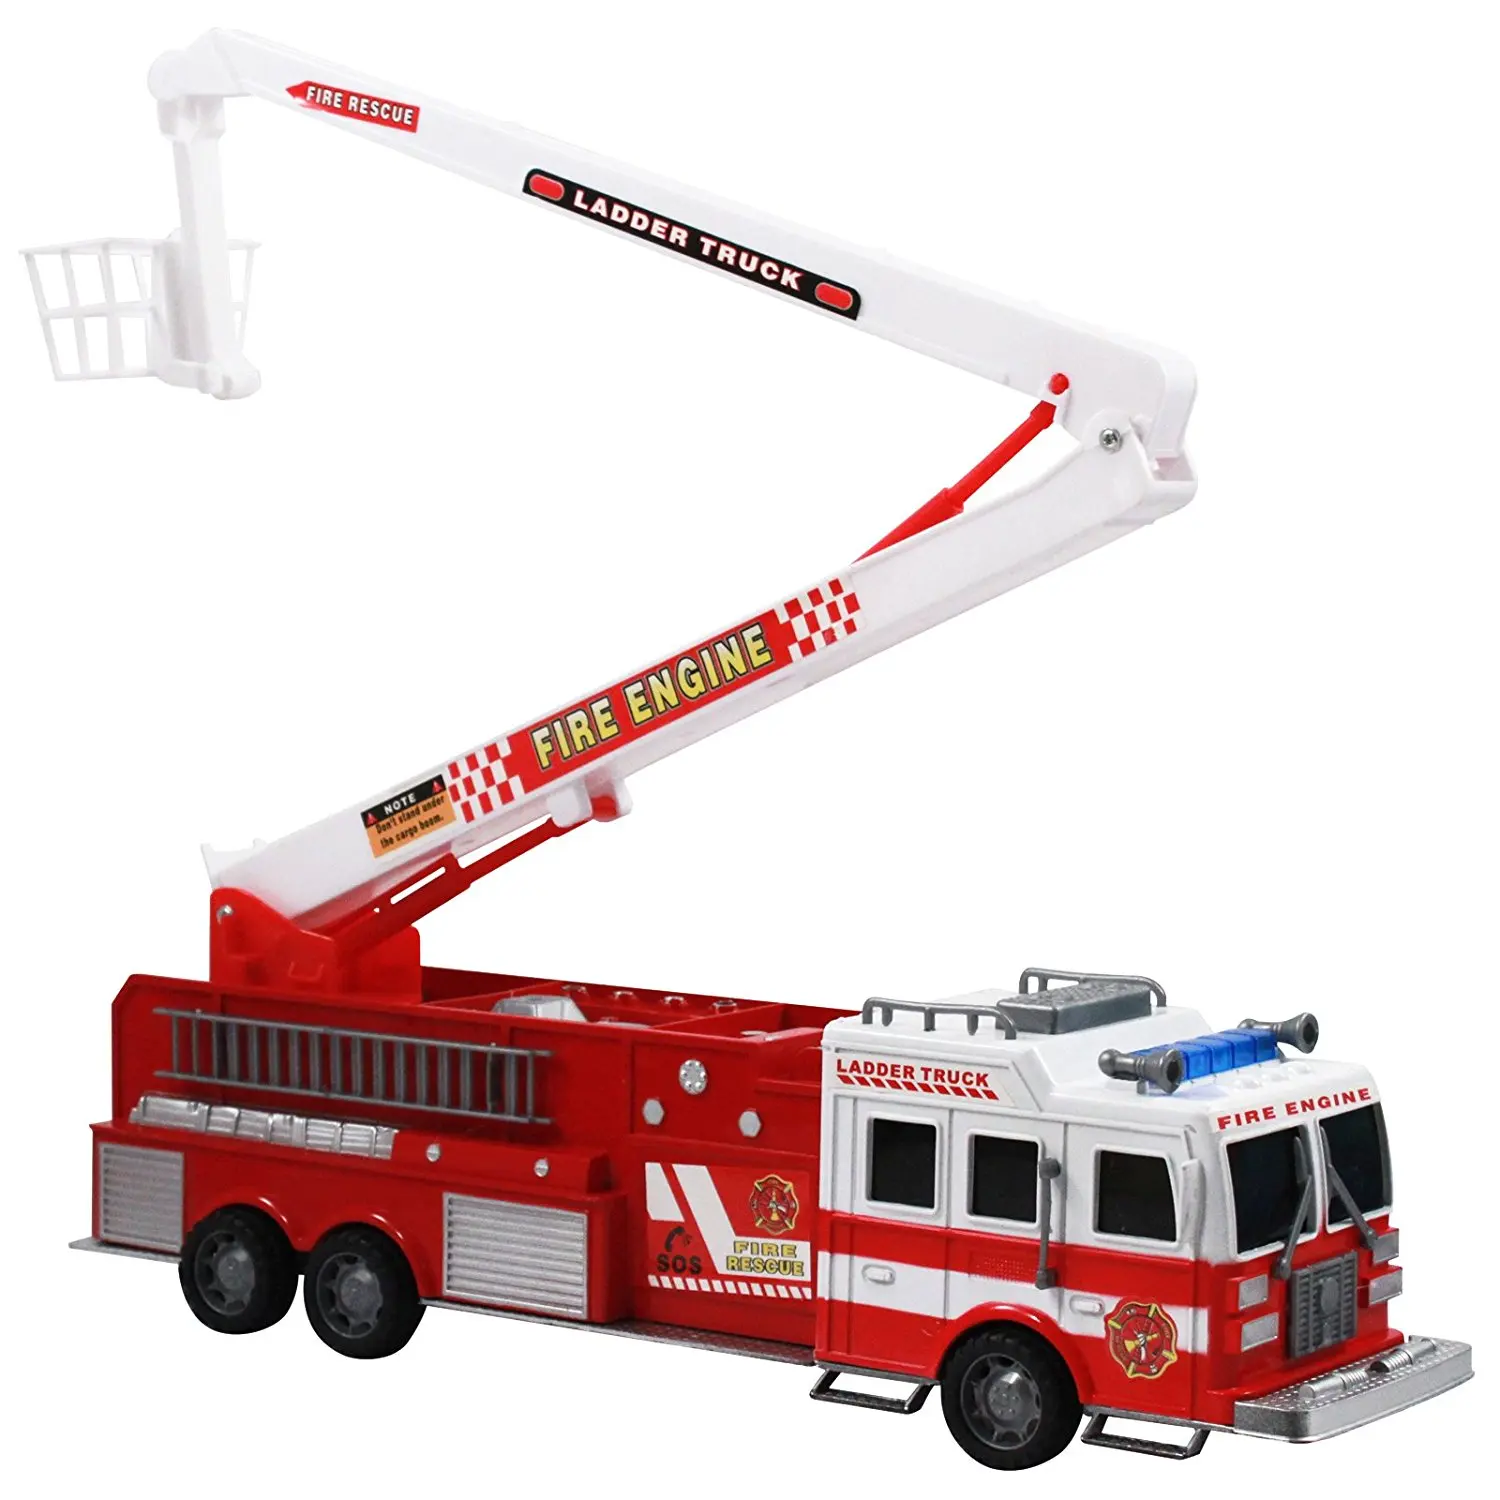 firefighter truck toy